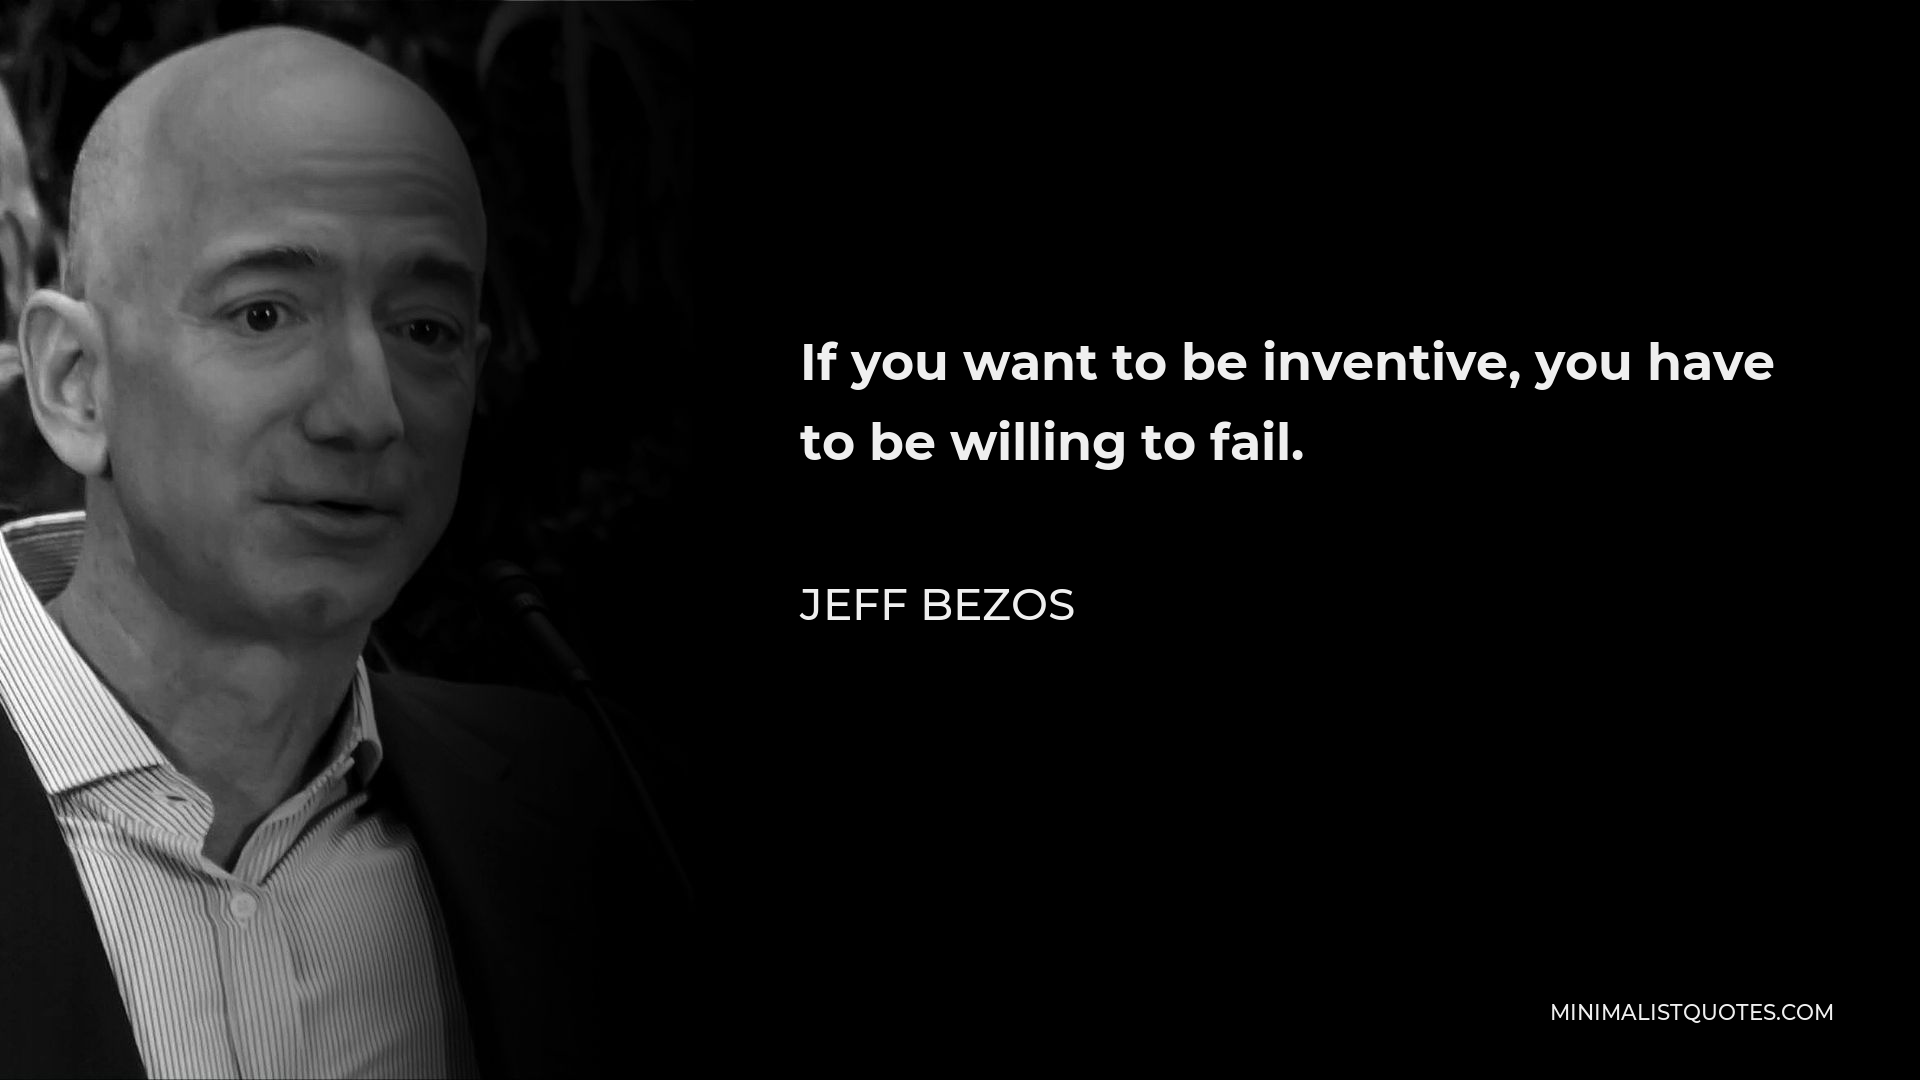 Jeff Bezos Quote - If you want to be inventive, you have to be willing to fail.